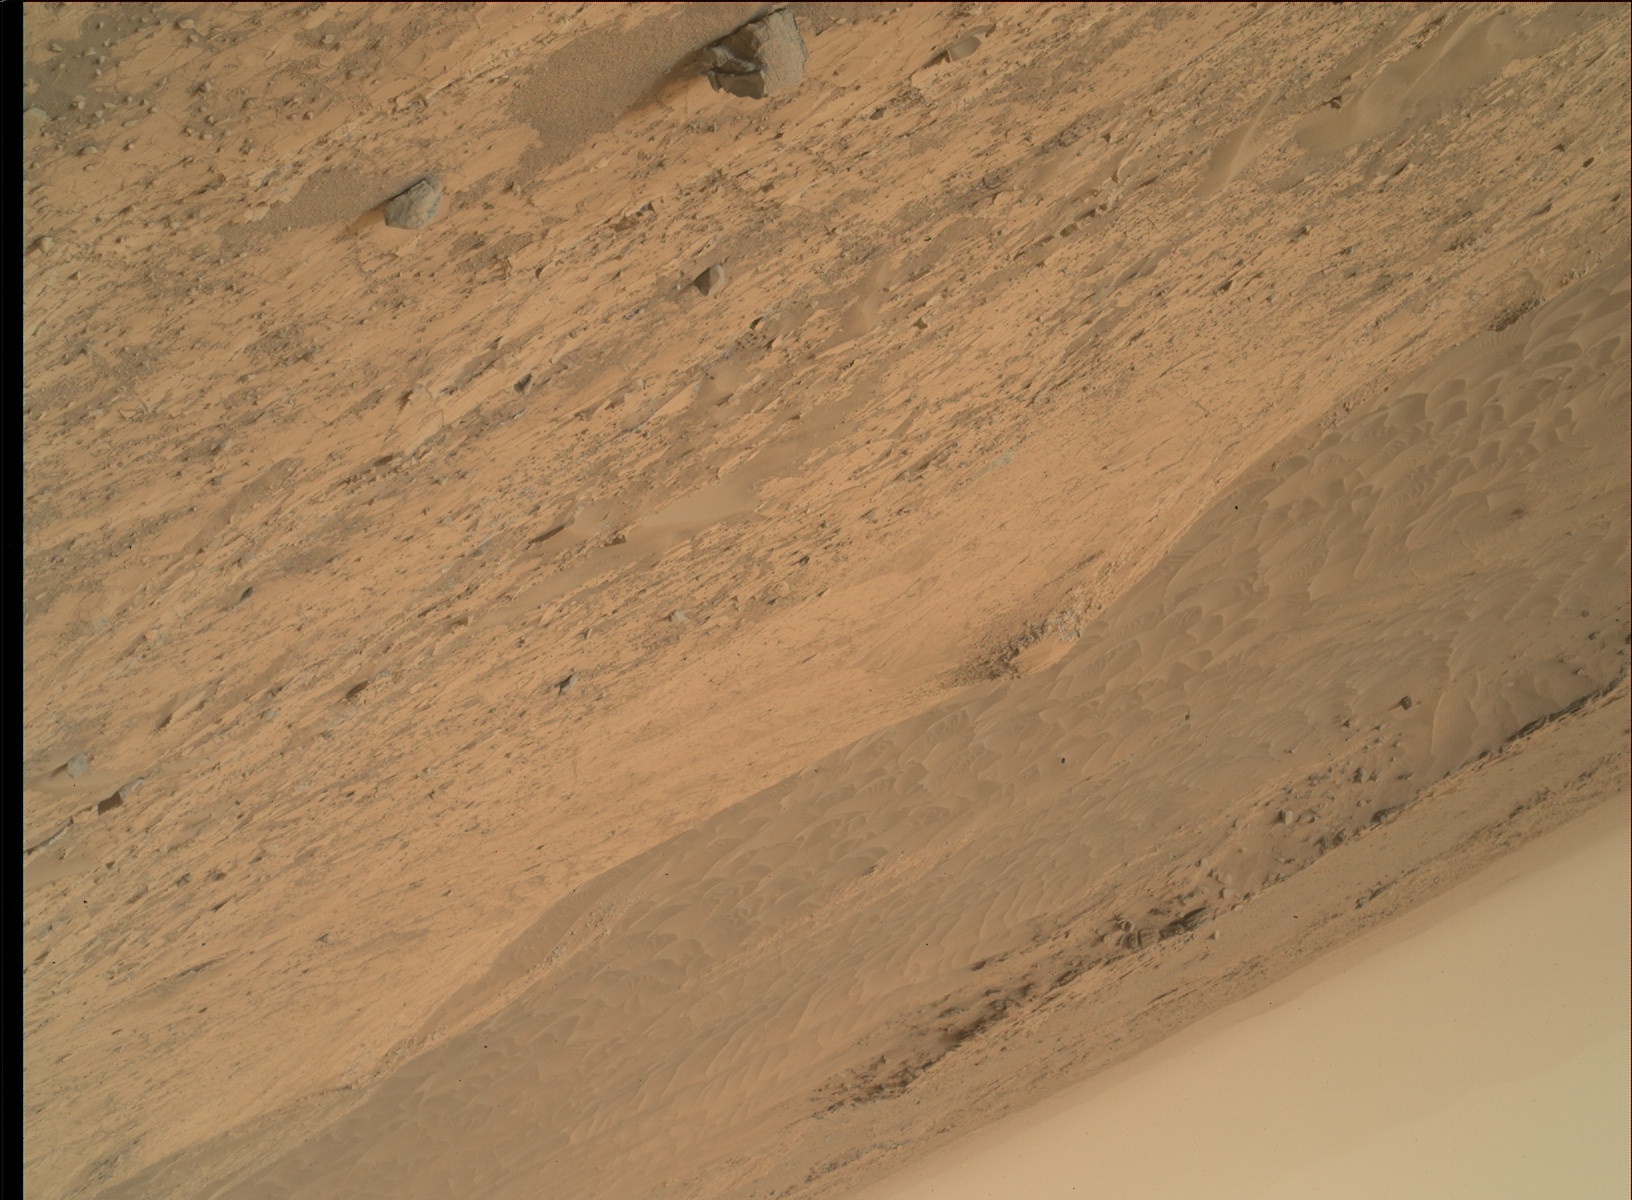 Nasa's Mars rover Curiosity acquired this image using its Mars Hand Lens Imager (MAHLI) on Sol 794